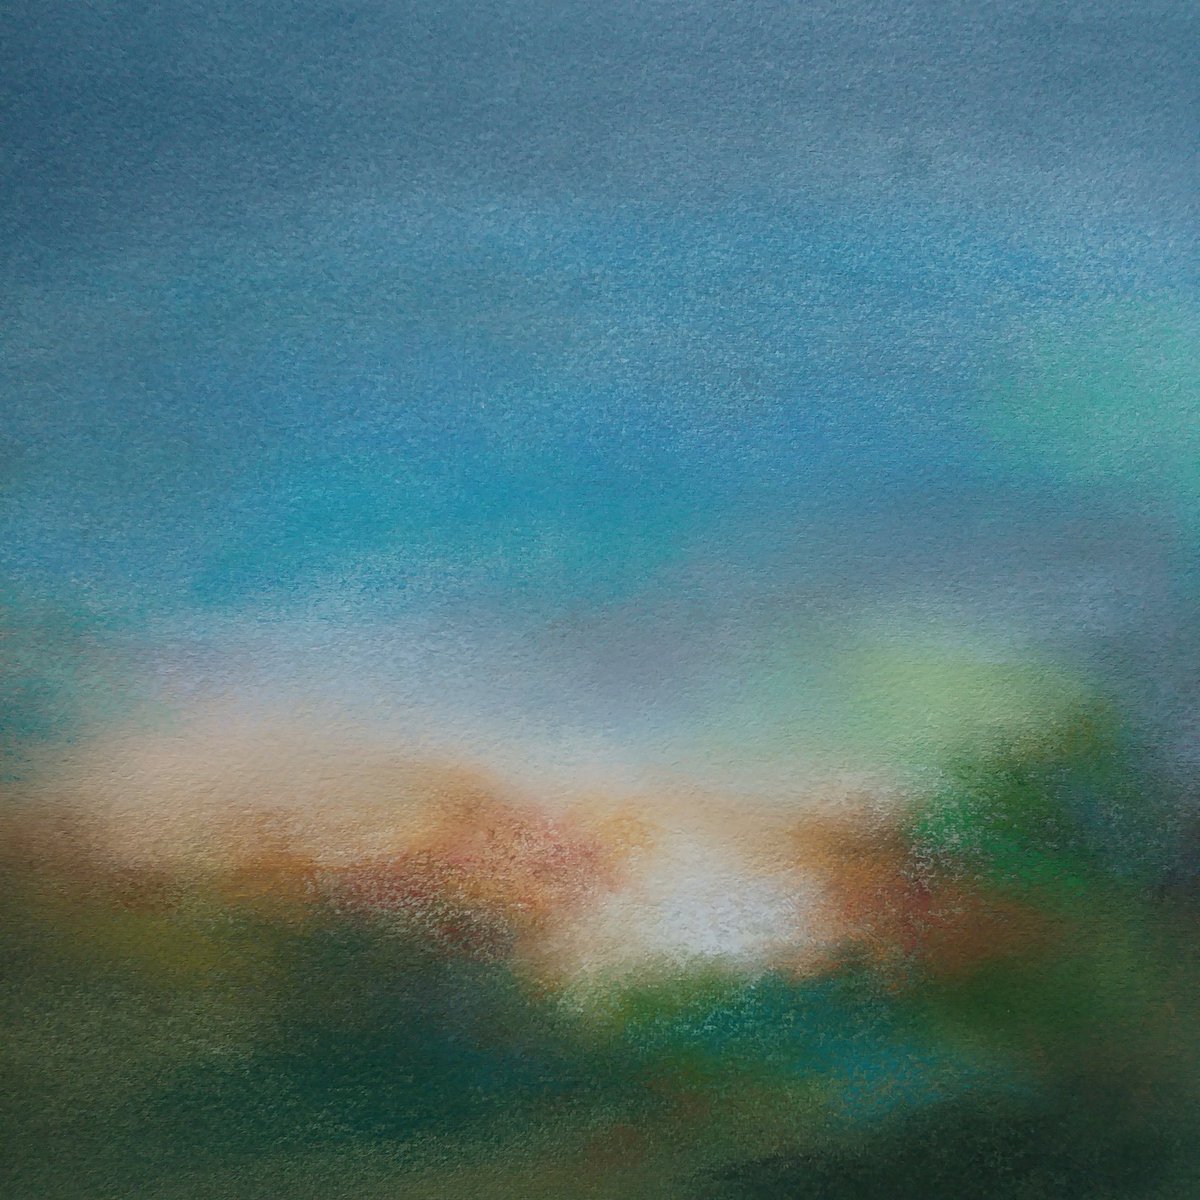 'Dawn Emerging' 29 x 32 cms after working on my acrylics, I am revisiting my pastels. 
#Art #artist #pastel #saunderswaterford #contemporaryart #contemporaryartist #painting #emergingartist #artistoninstagram #ArtistOnTwitter #landscapepainting #light #artoftheday #Artlovers